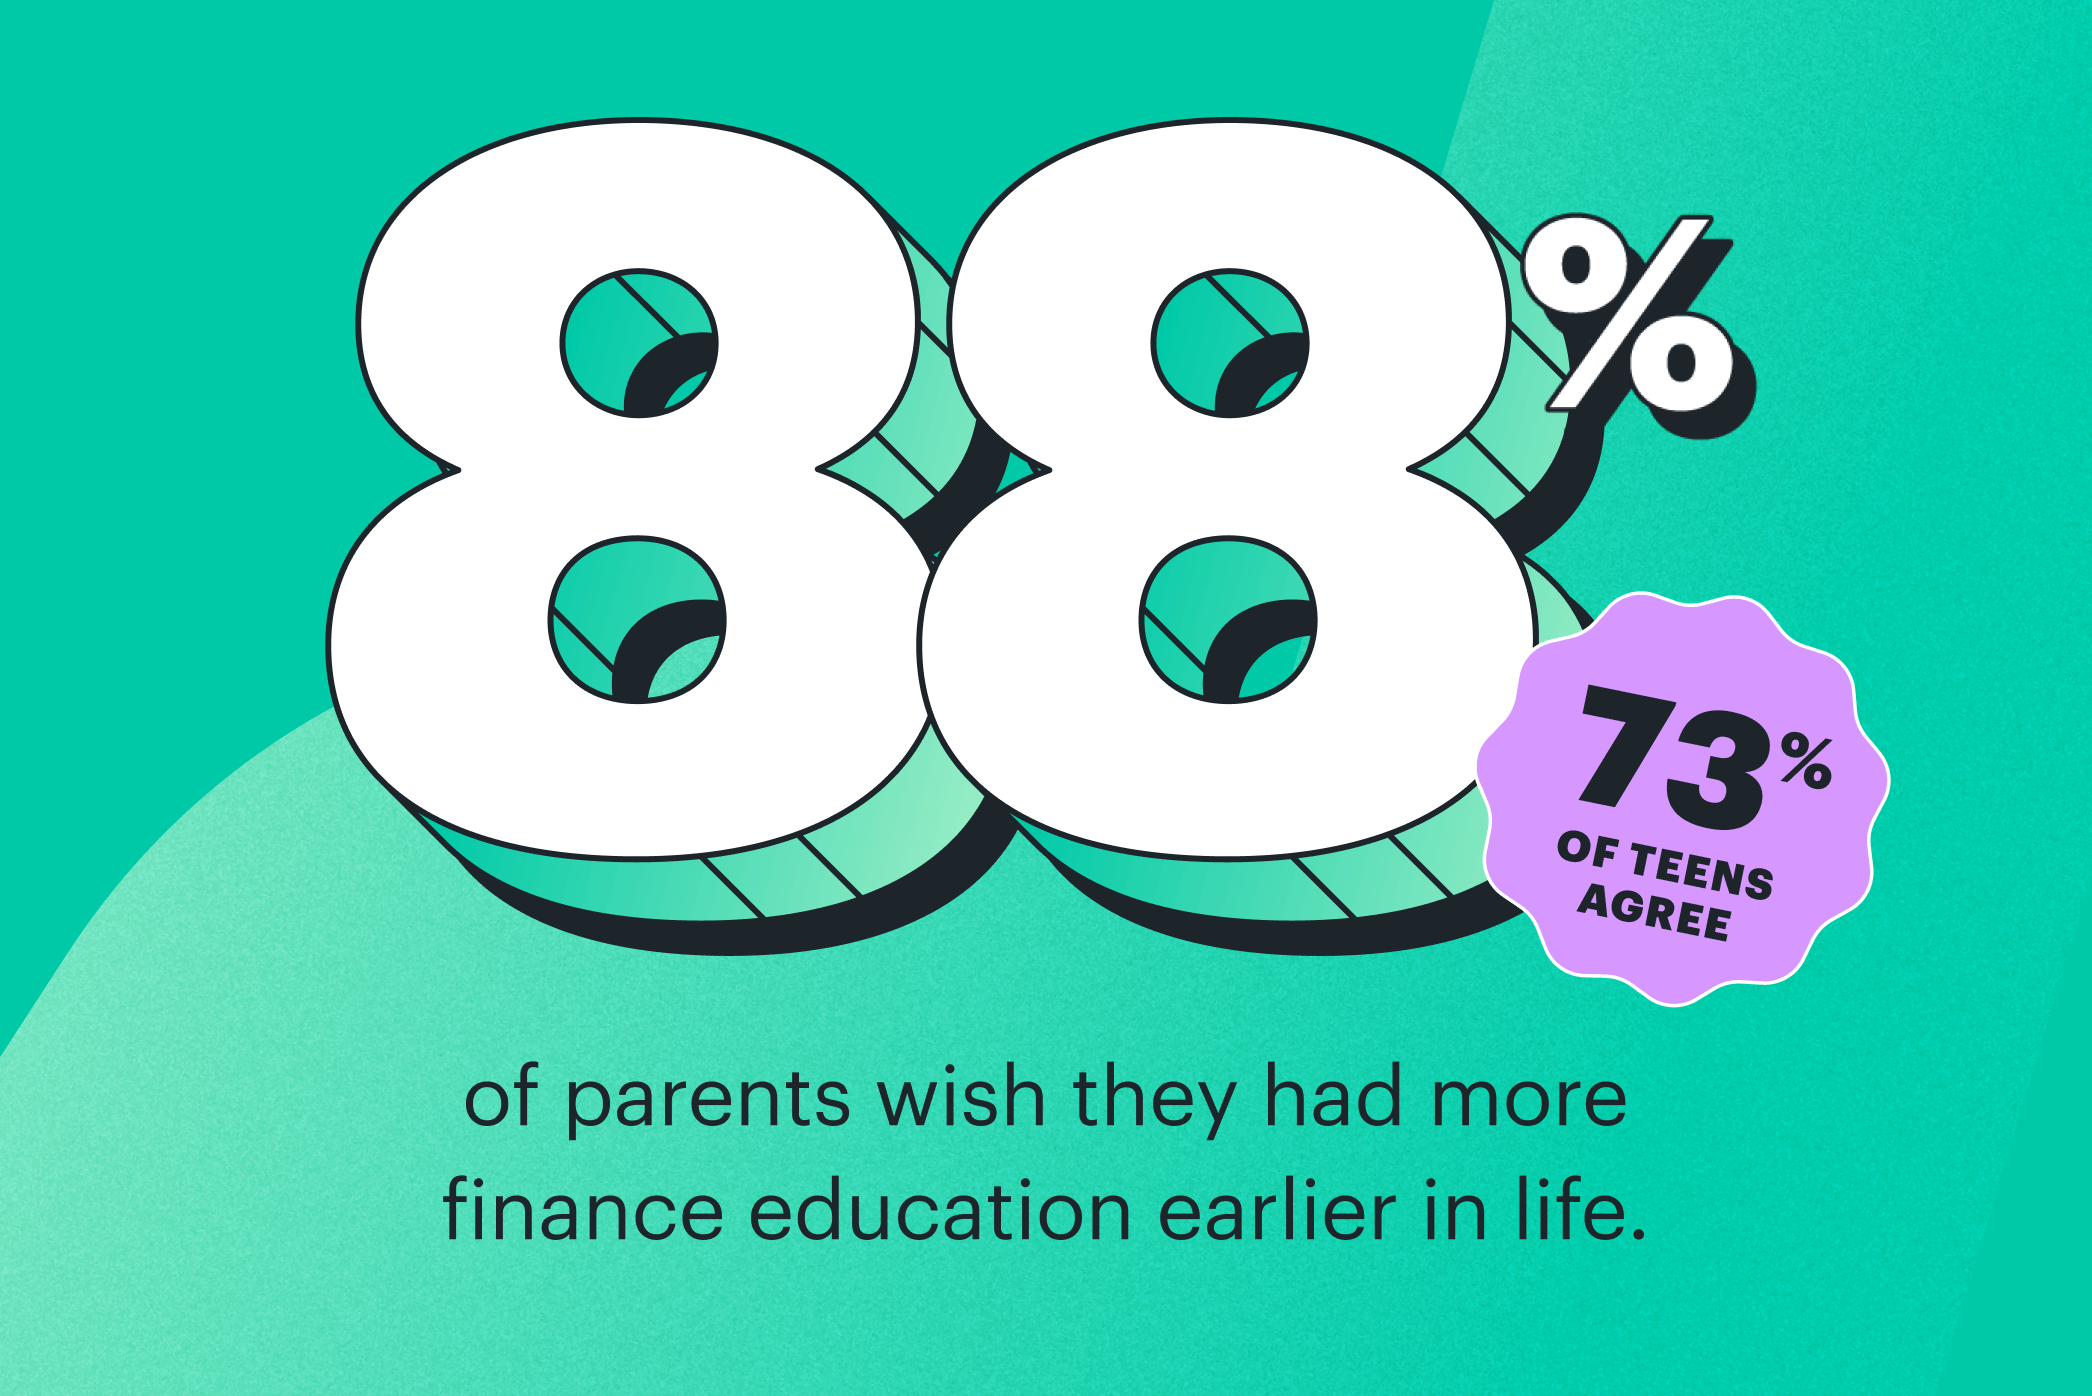 Statistic: 88% of parents wish they had more finance education earlier in life